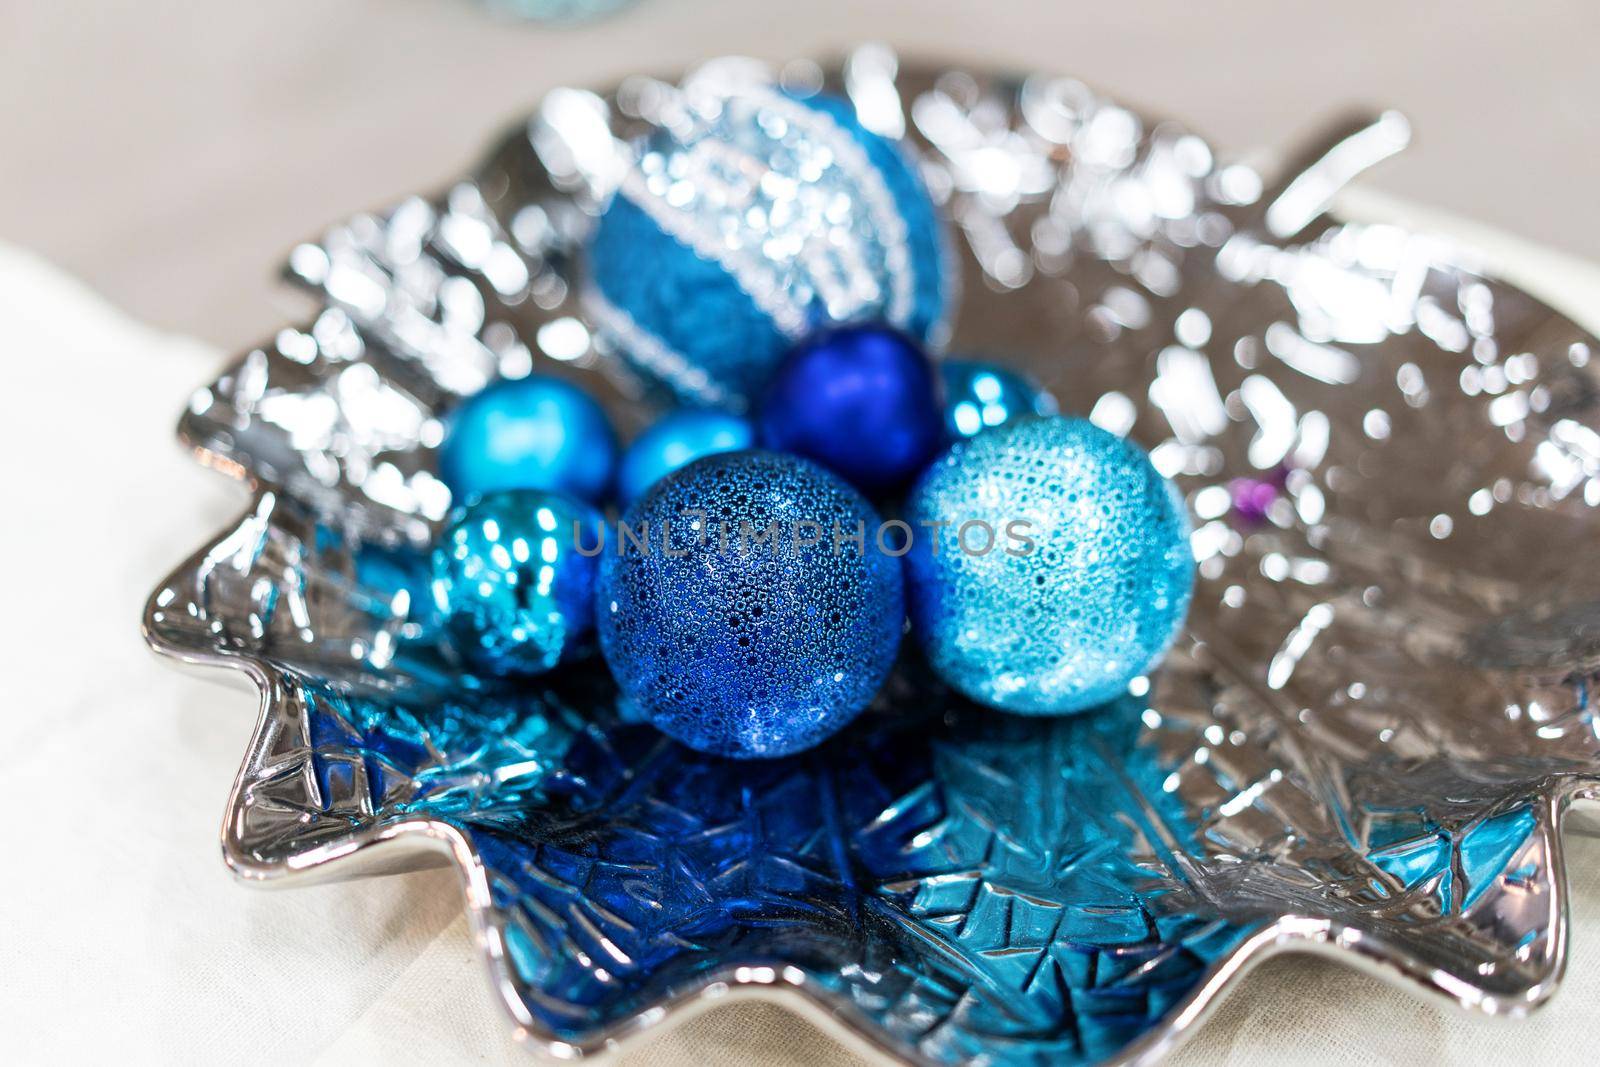 Shining Blue Christmas Decorations on Silver Plate. New Year Inspiration Still Life. Beautiful still life with round blue Christmas decorations. Close up shot.